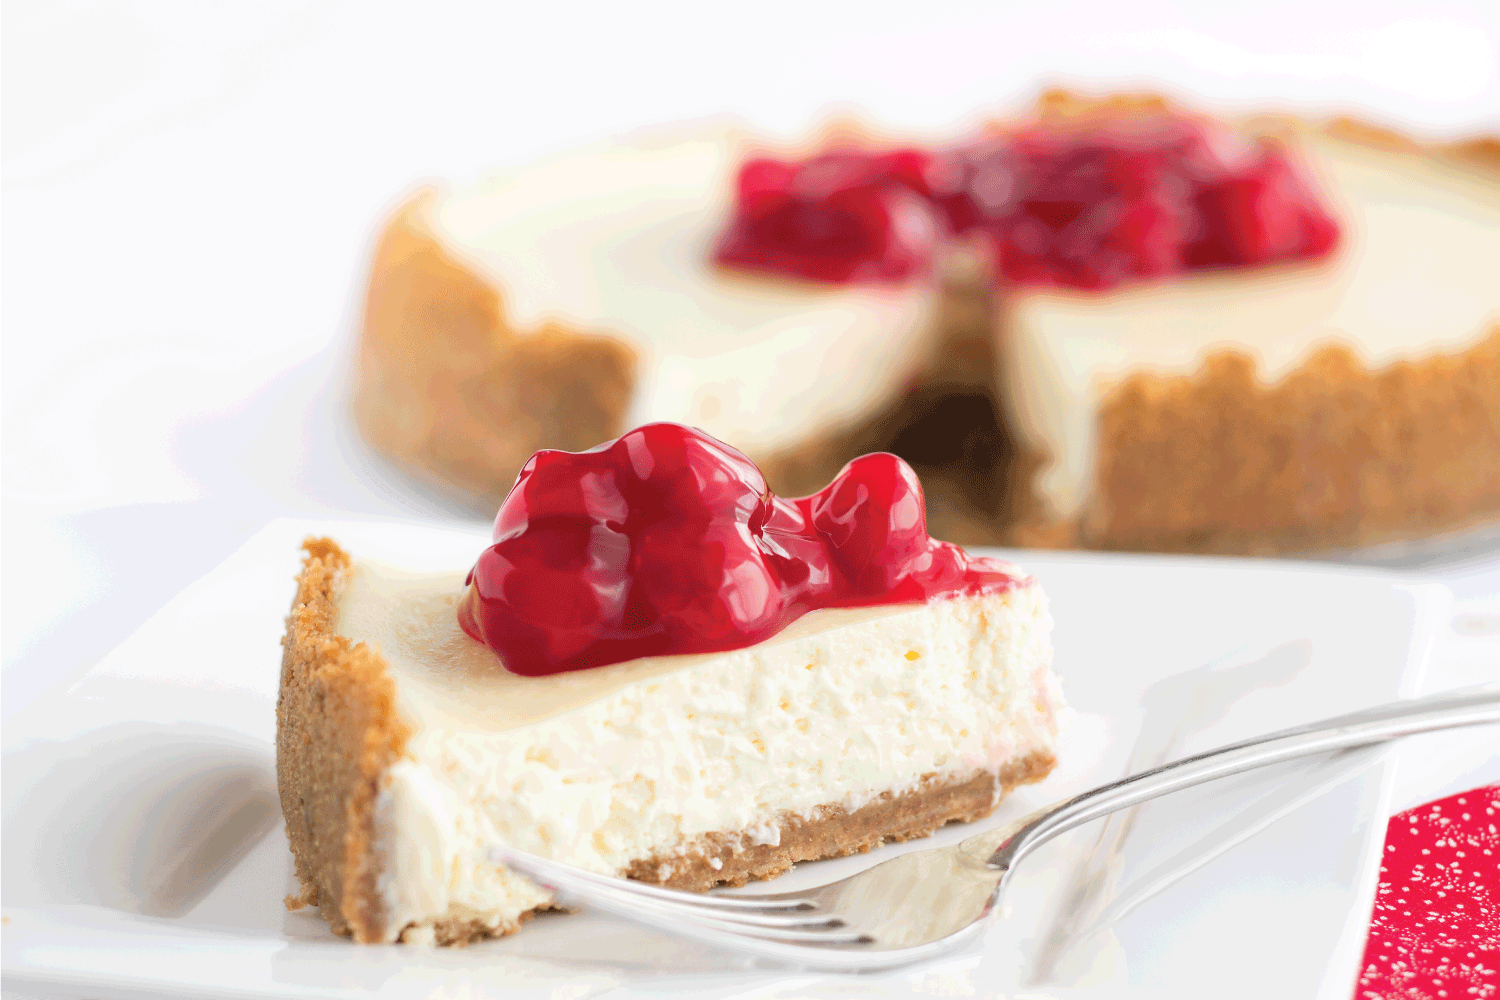 Delicious sweet red cherries top a smooth, creamy, decadent slice of cheesecake.